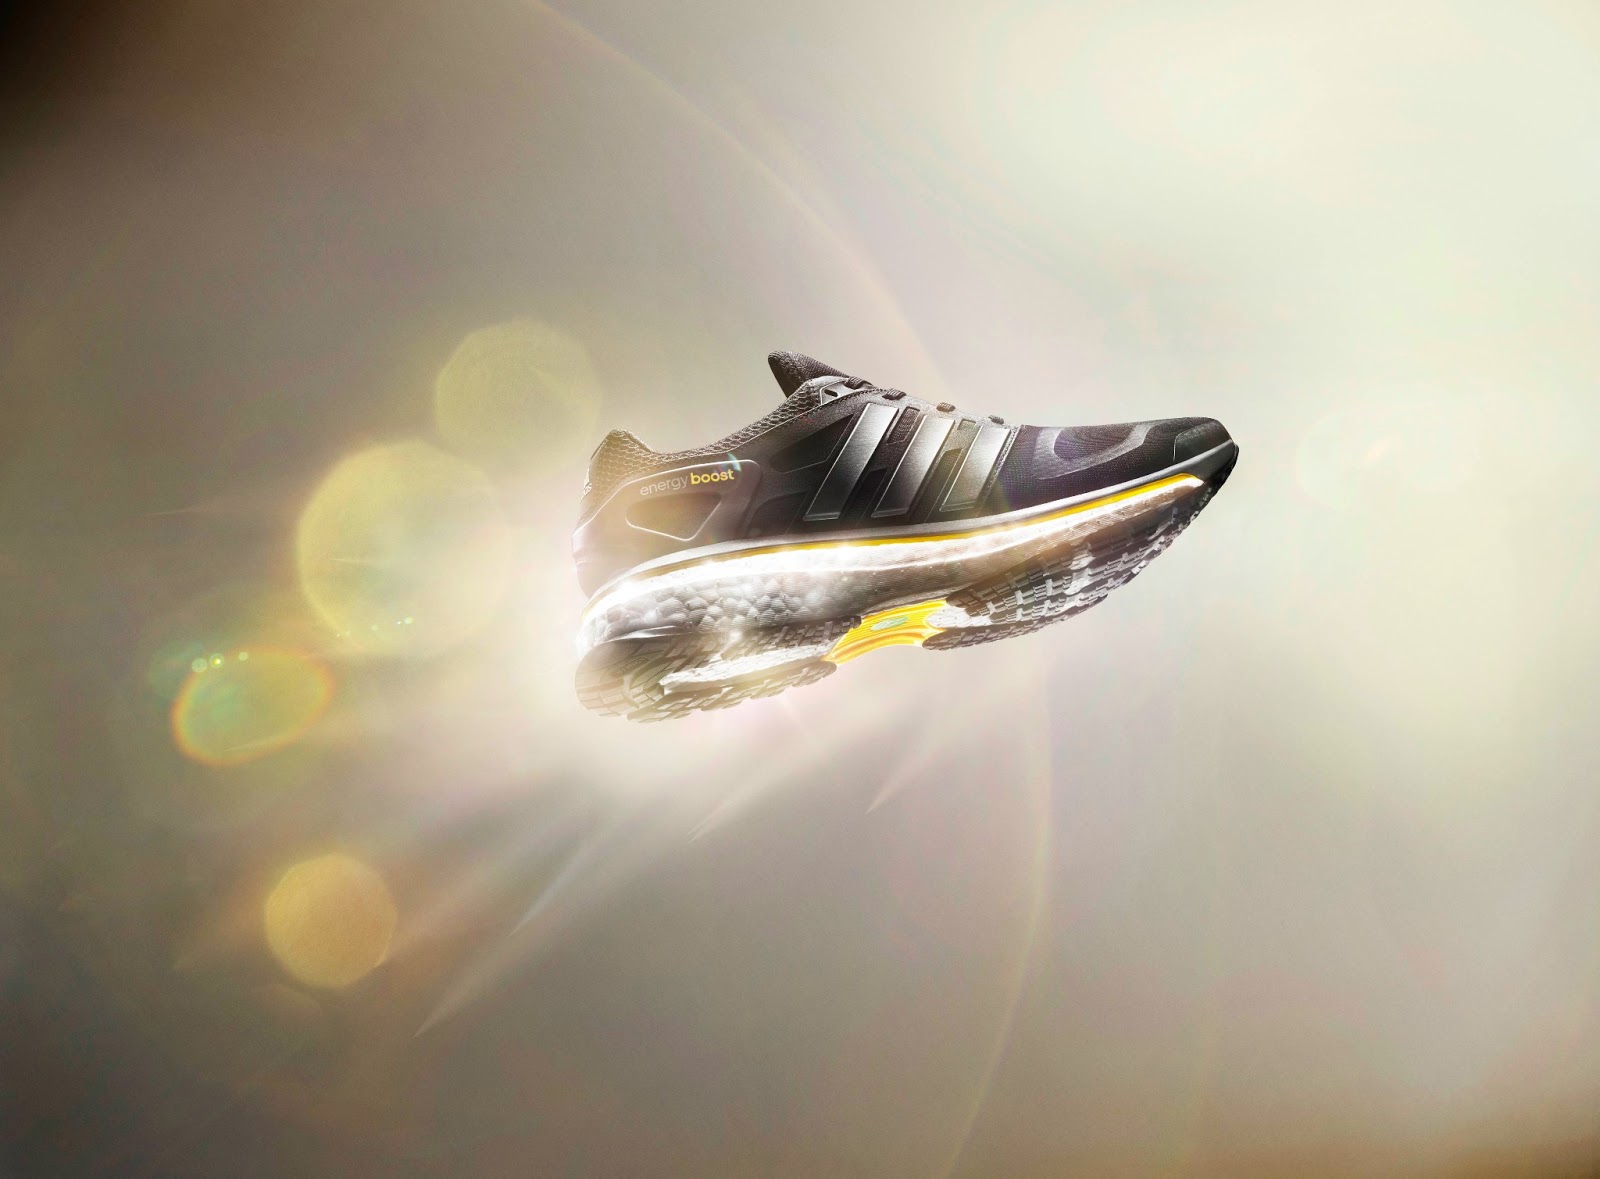 Paul Merca: adidas launches Boost cushioning system in new running shoe...